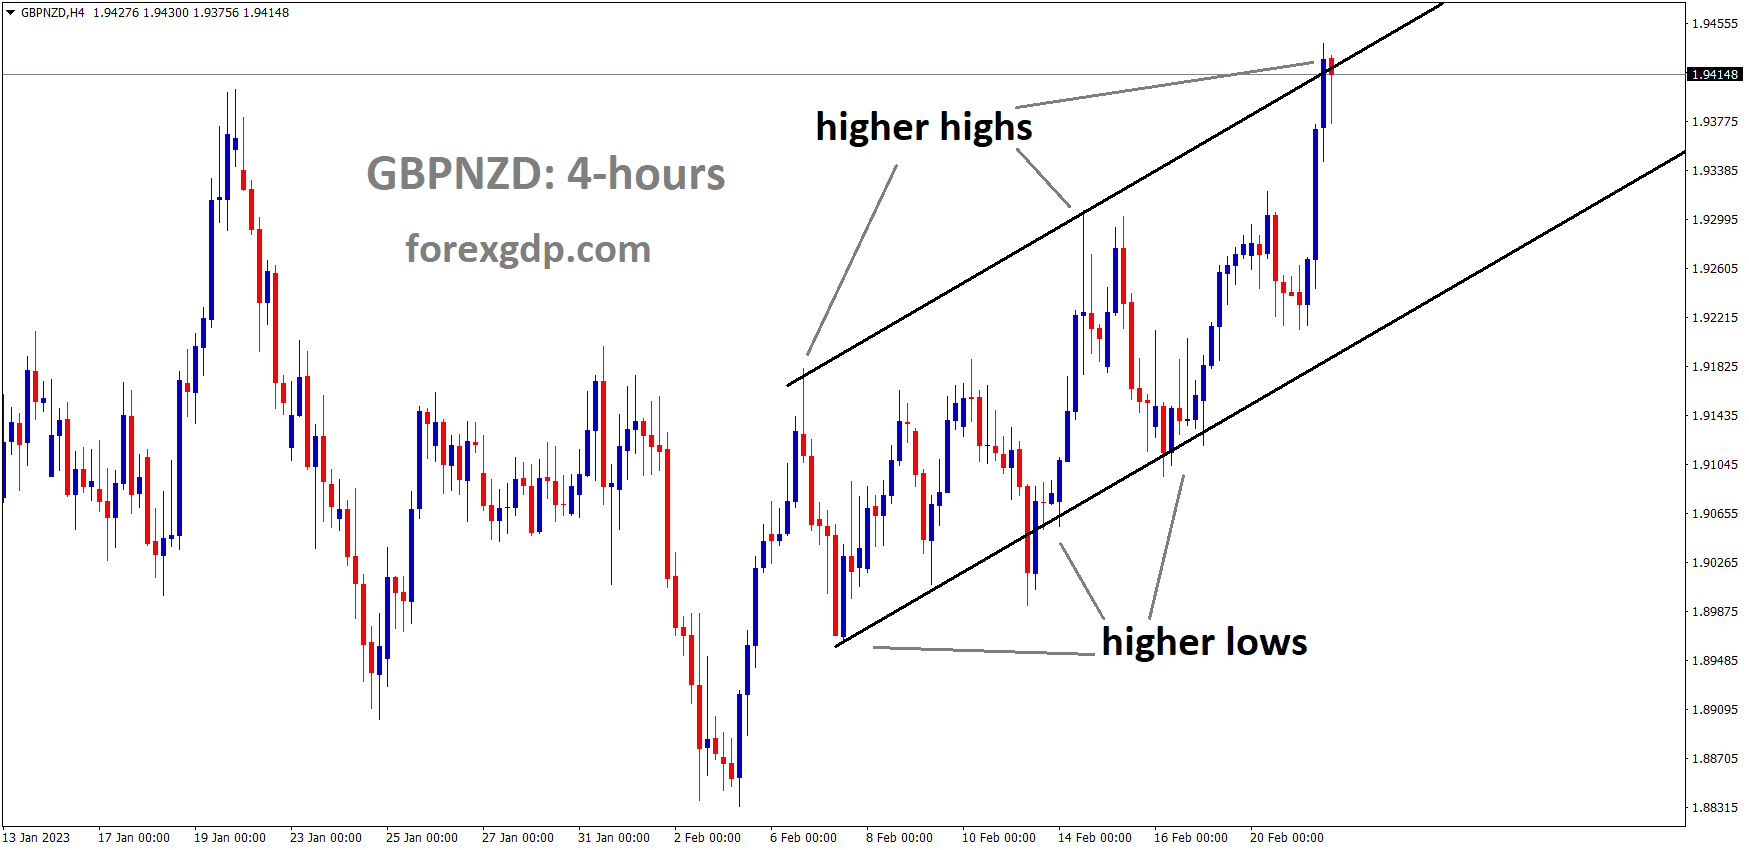 GBPNZD H4 TF Analysis Market is moving in an Ascending channel and the market has reached the higher high area of the channel